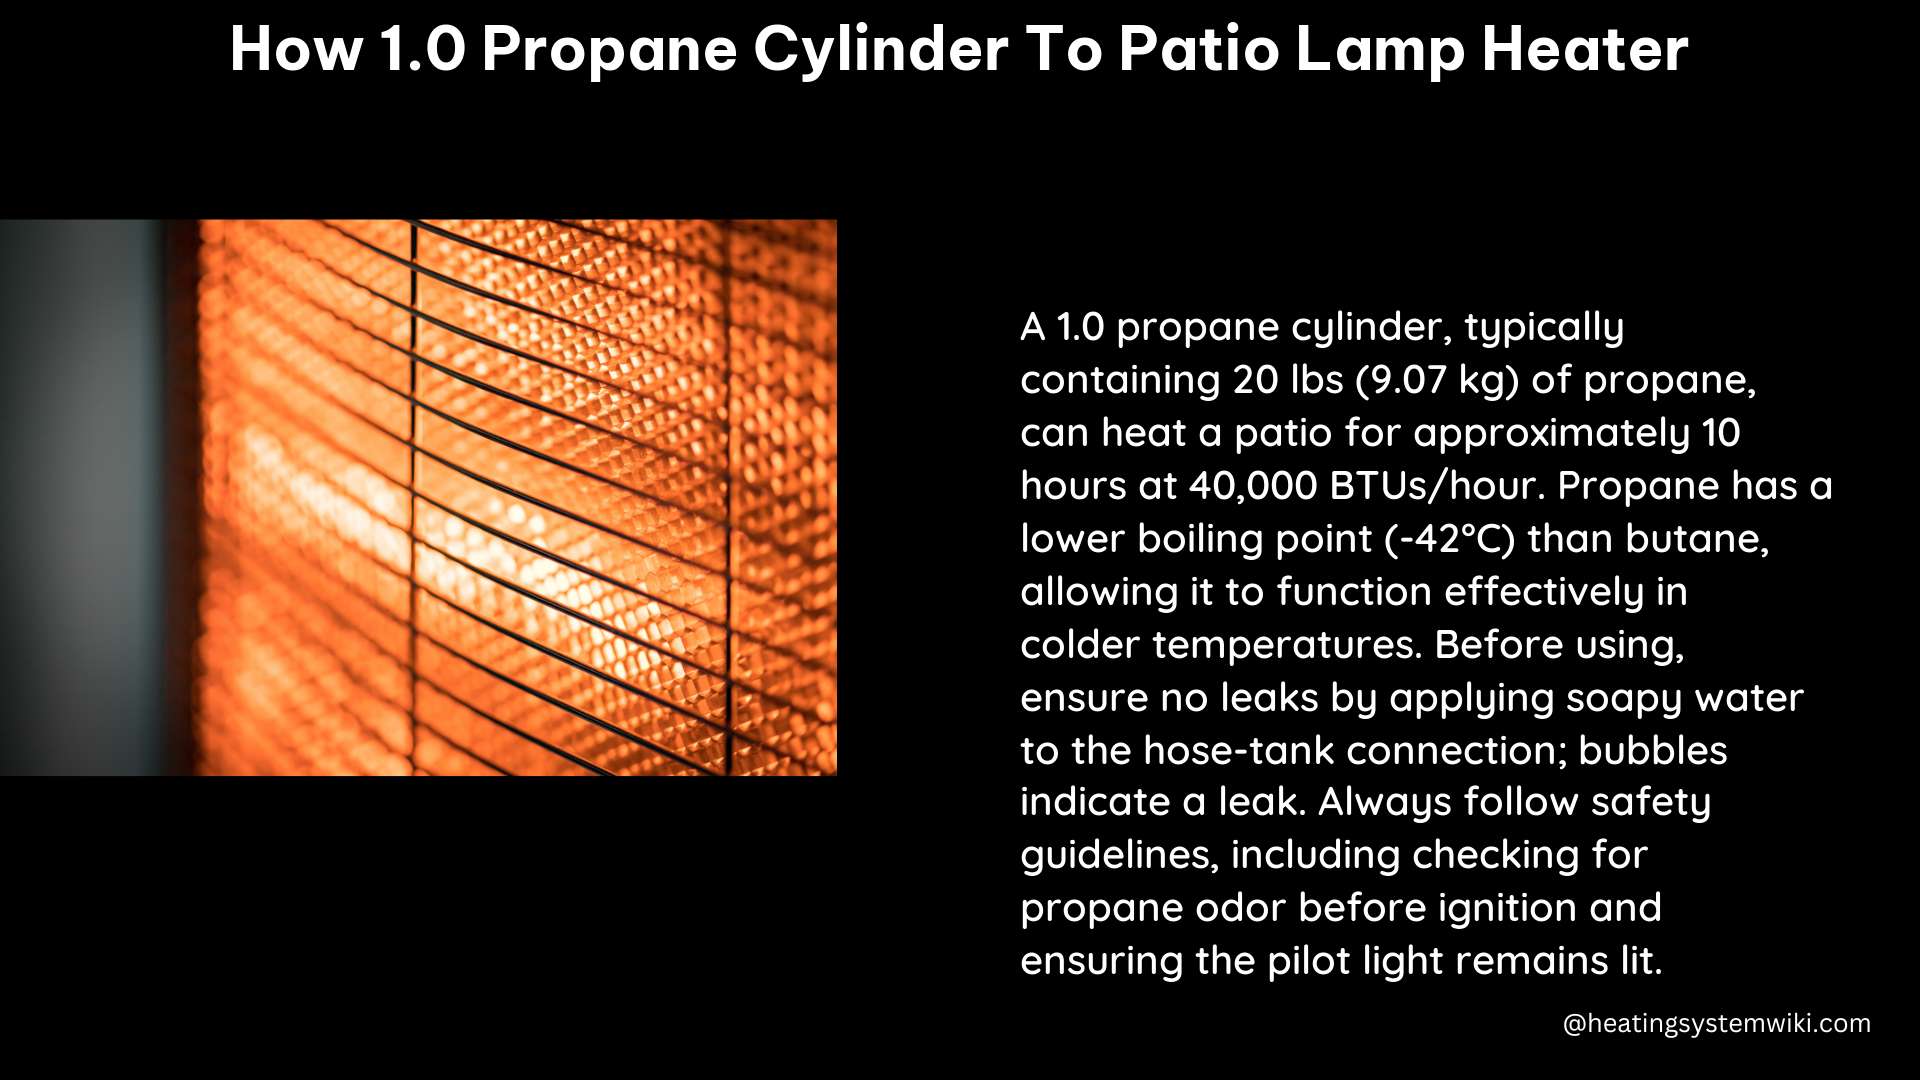 how 1.0 propane cylinder to patio lamp heater